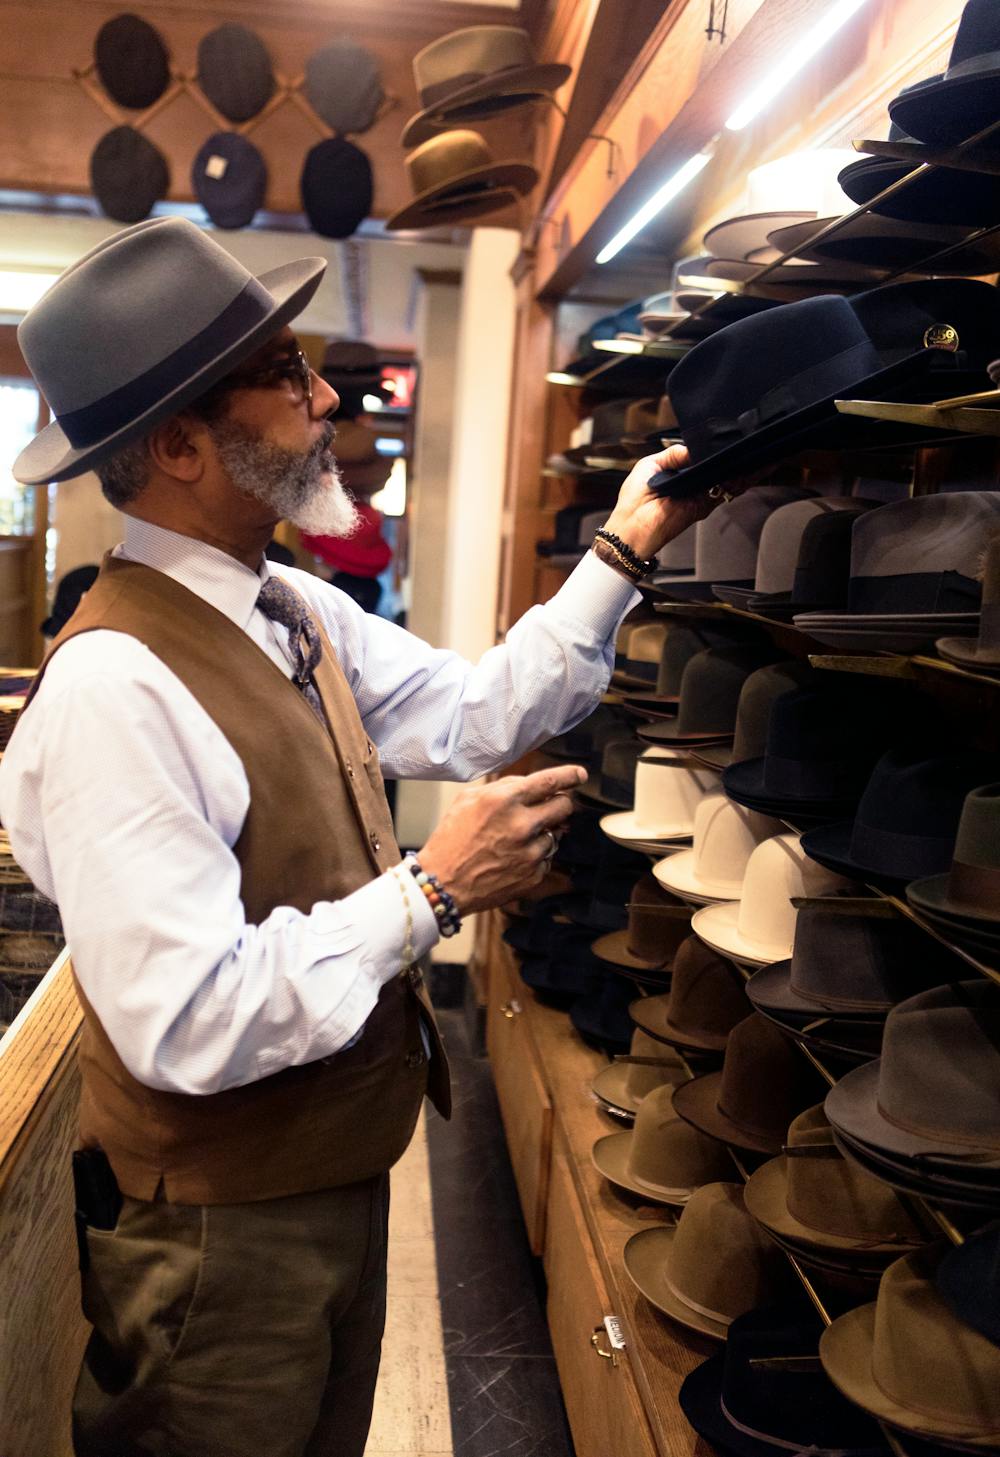 Man picking hat in the rack at a department store. | Photo: Pexels